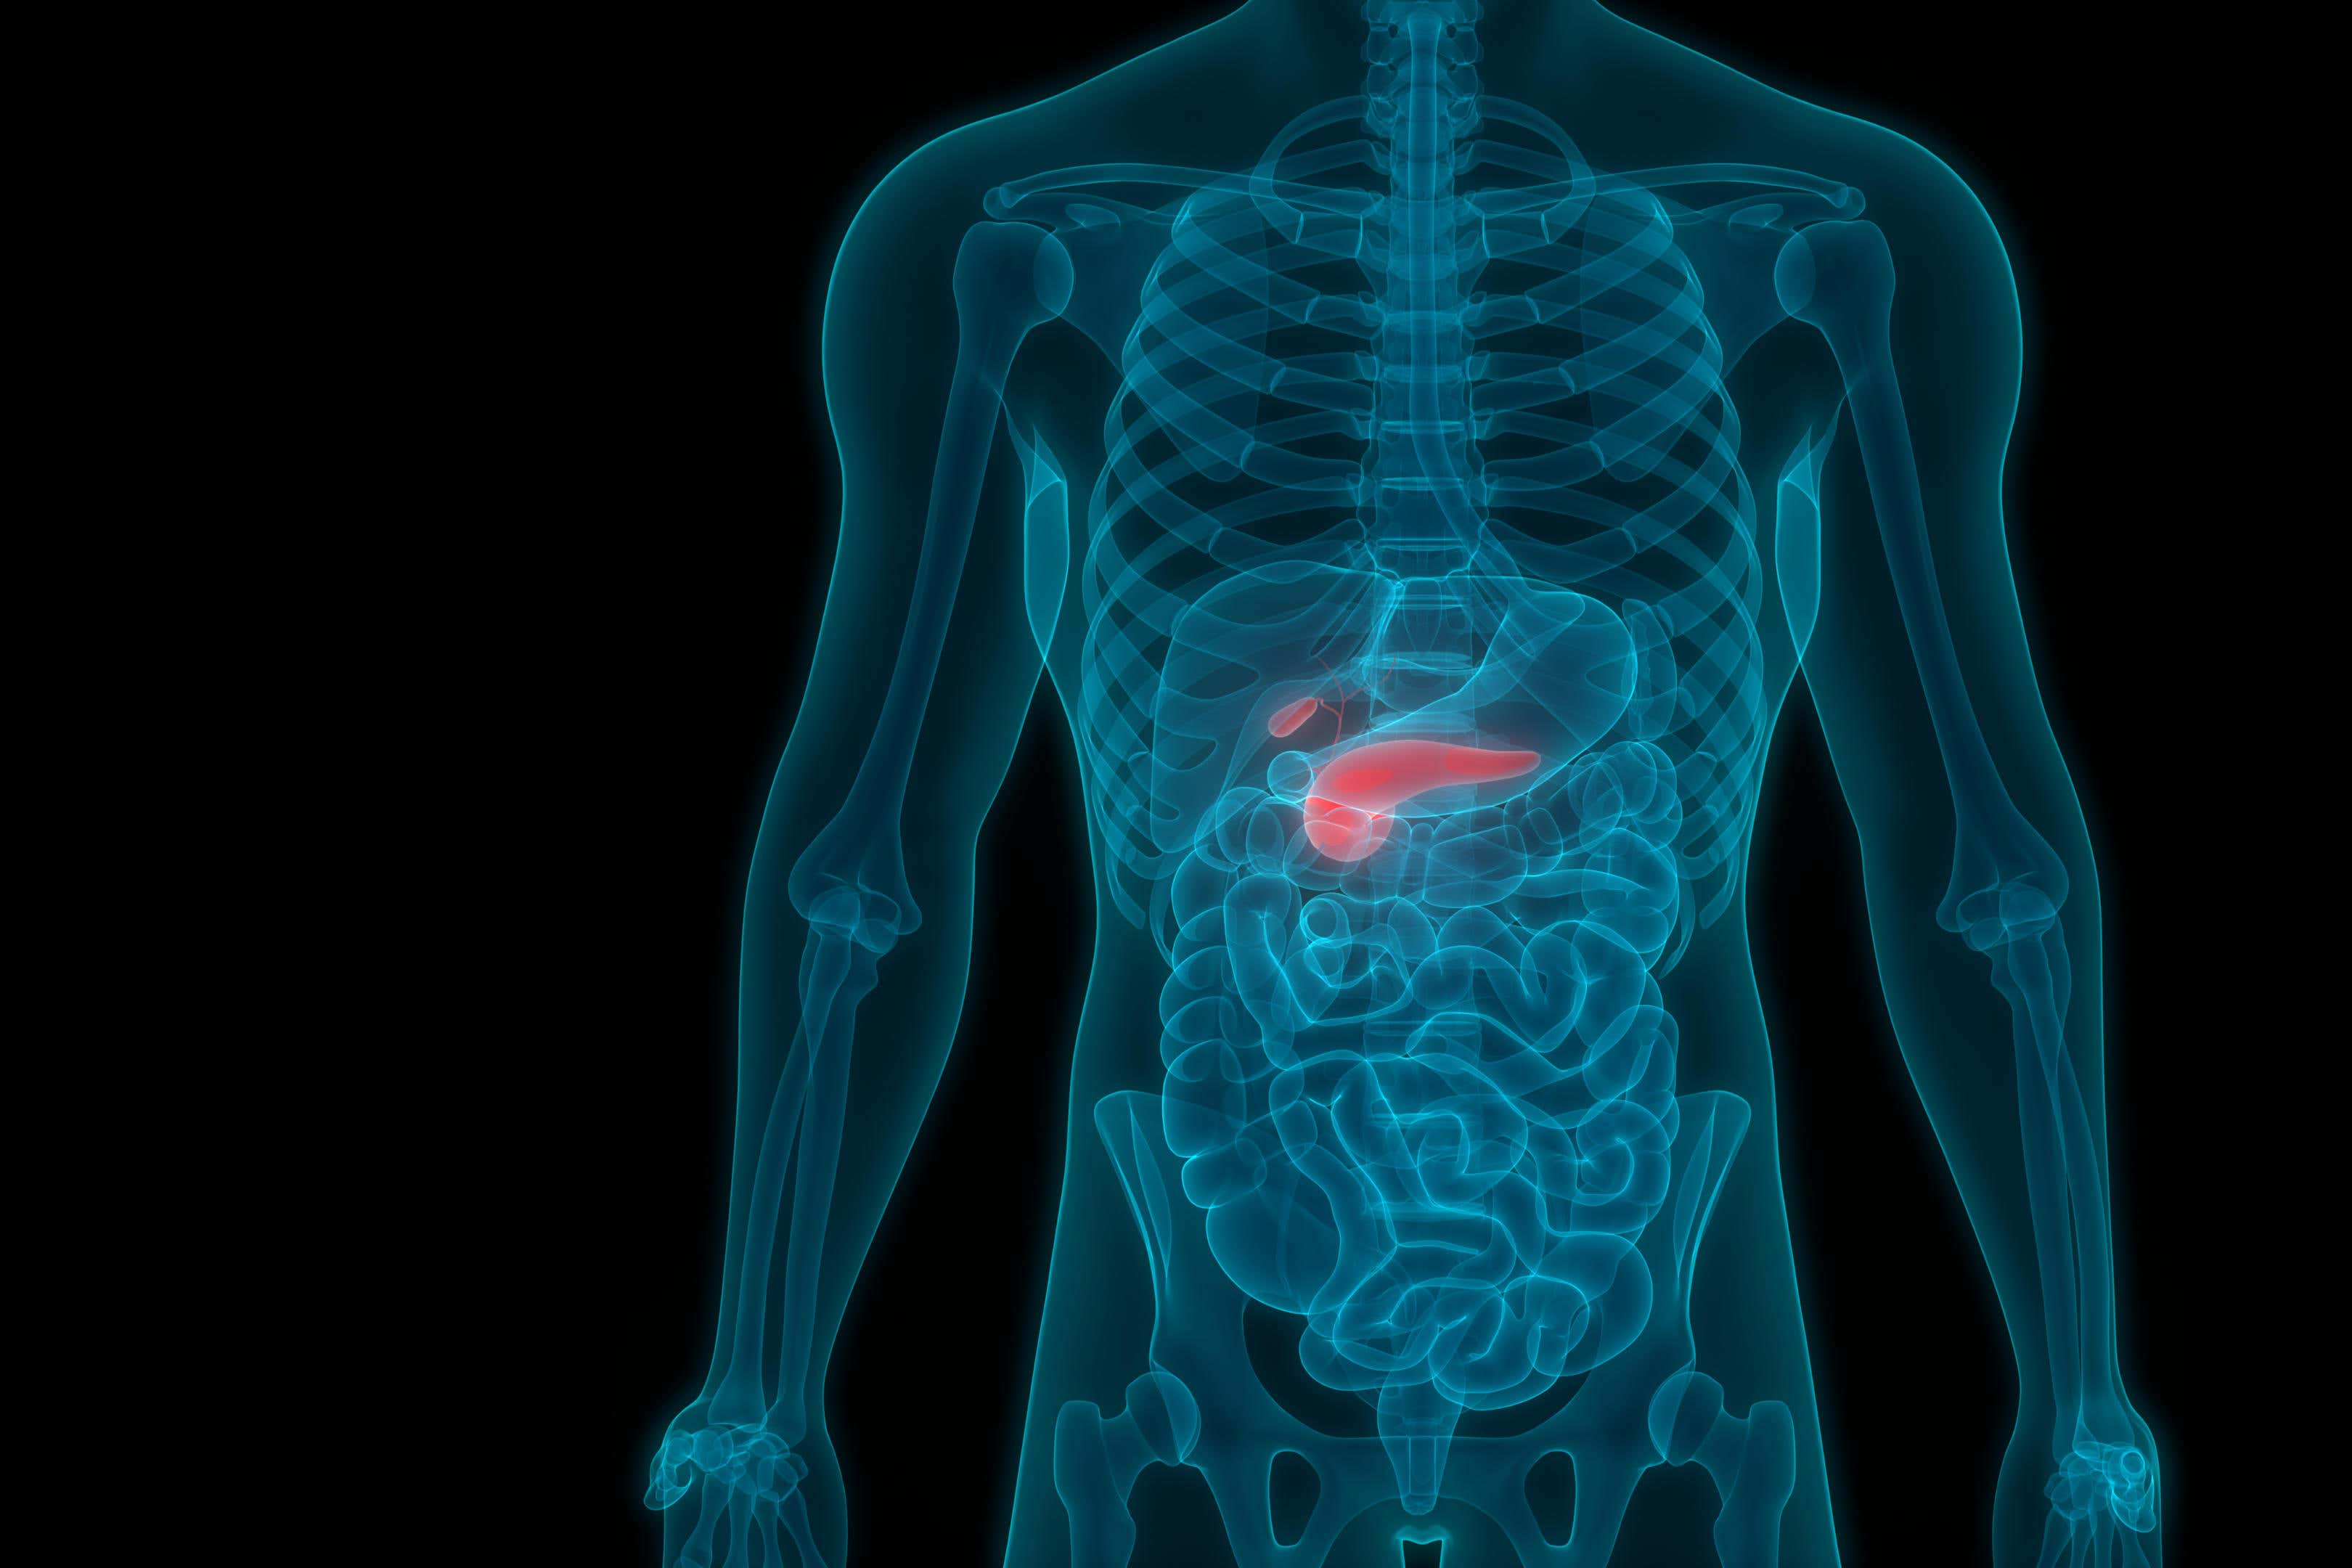 Pancreatic cancer “changes its diet” to keep growing, a new study has revealed.